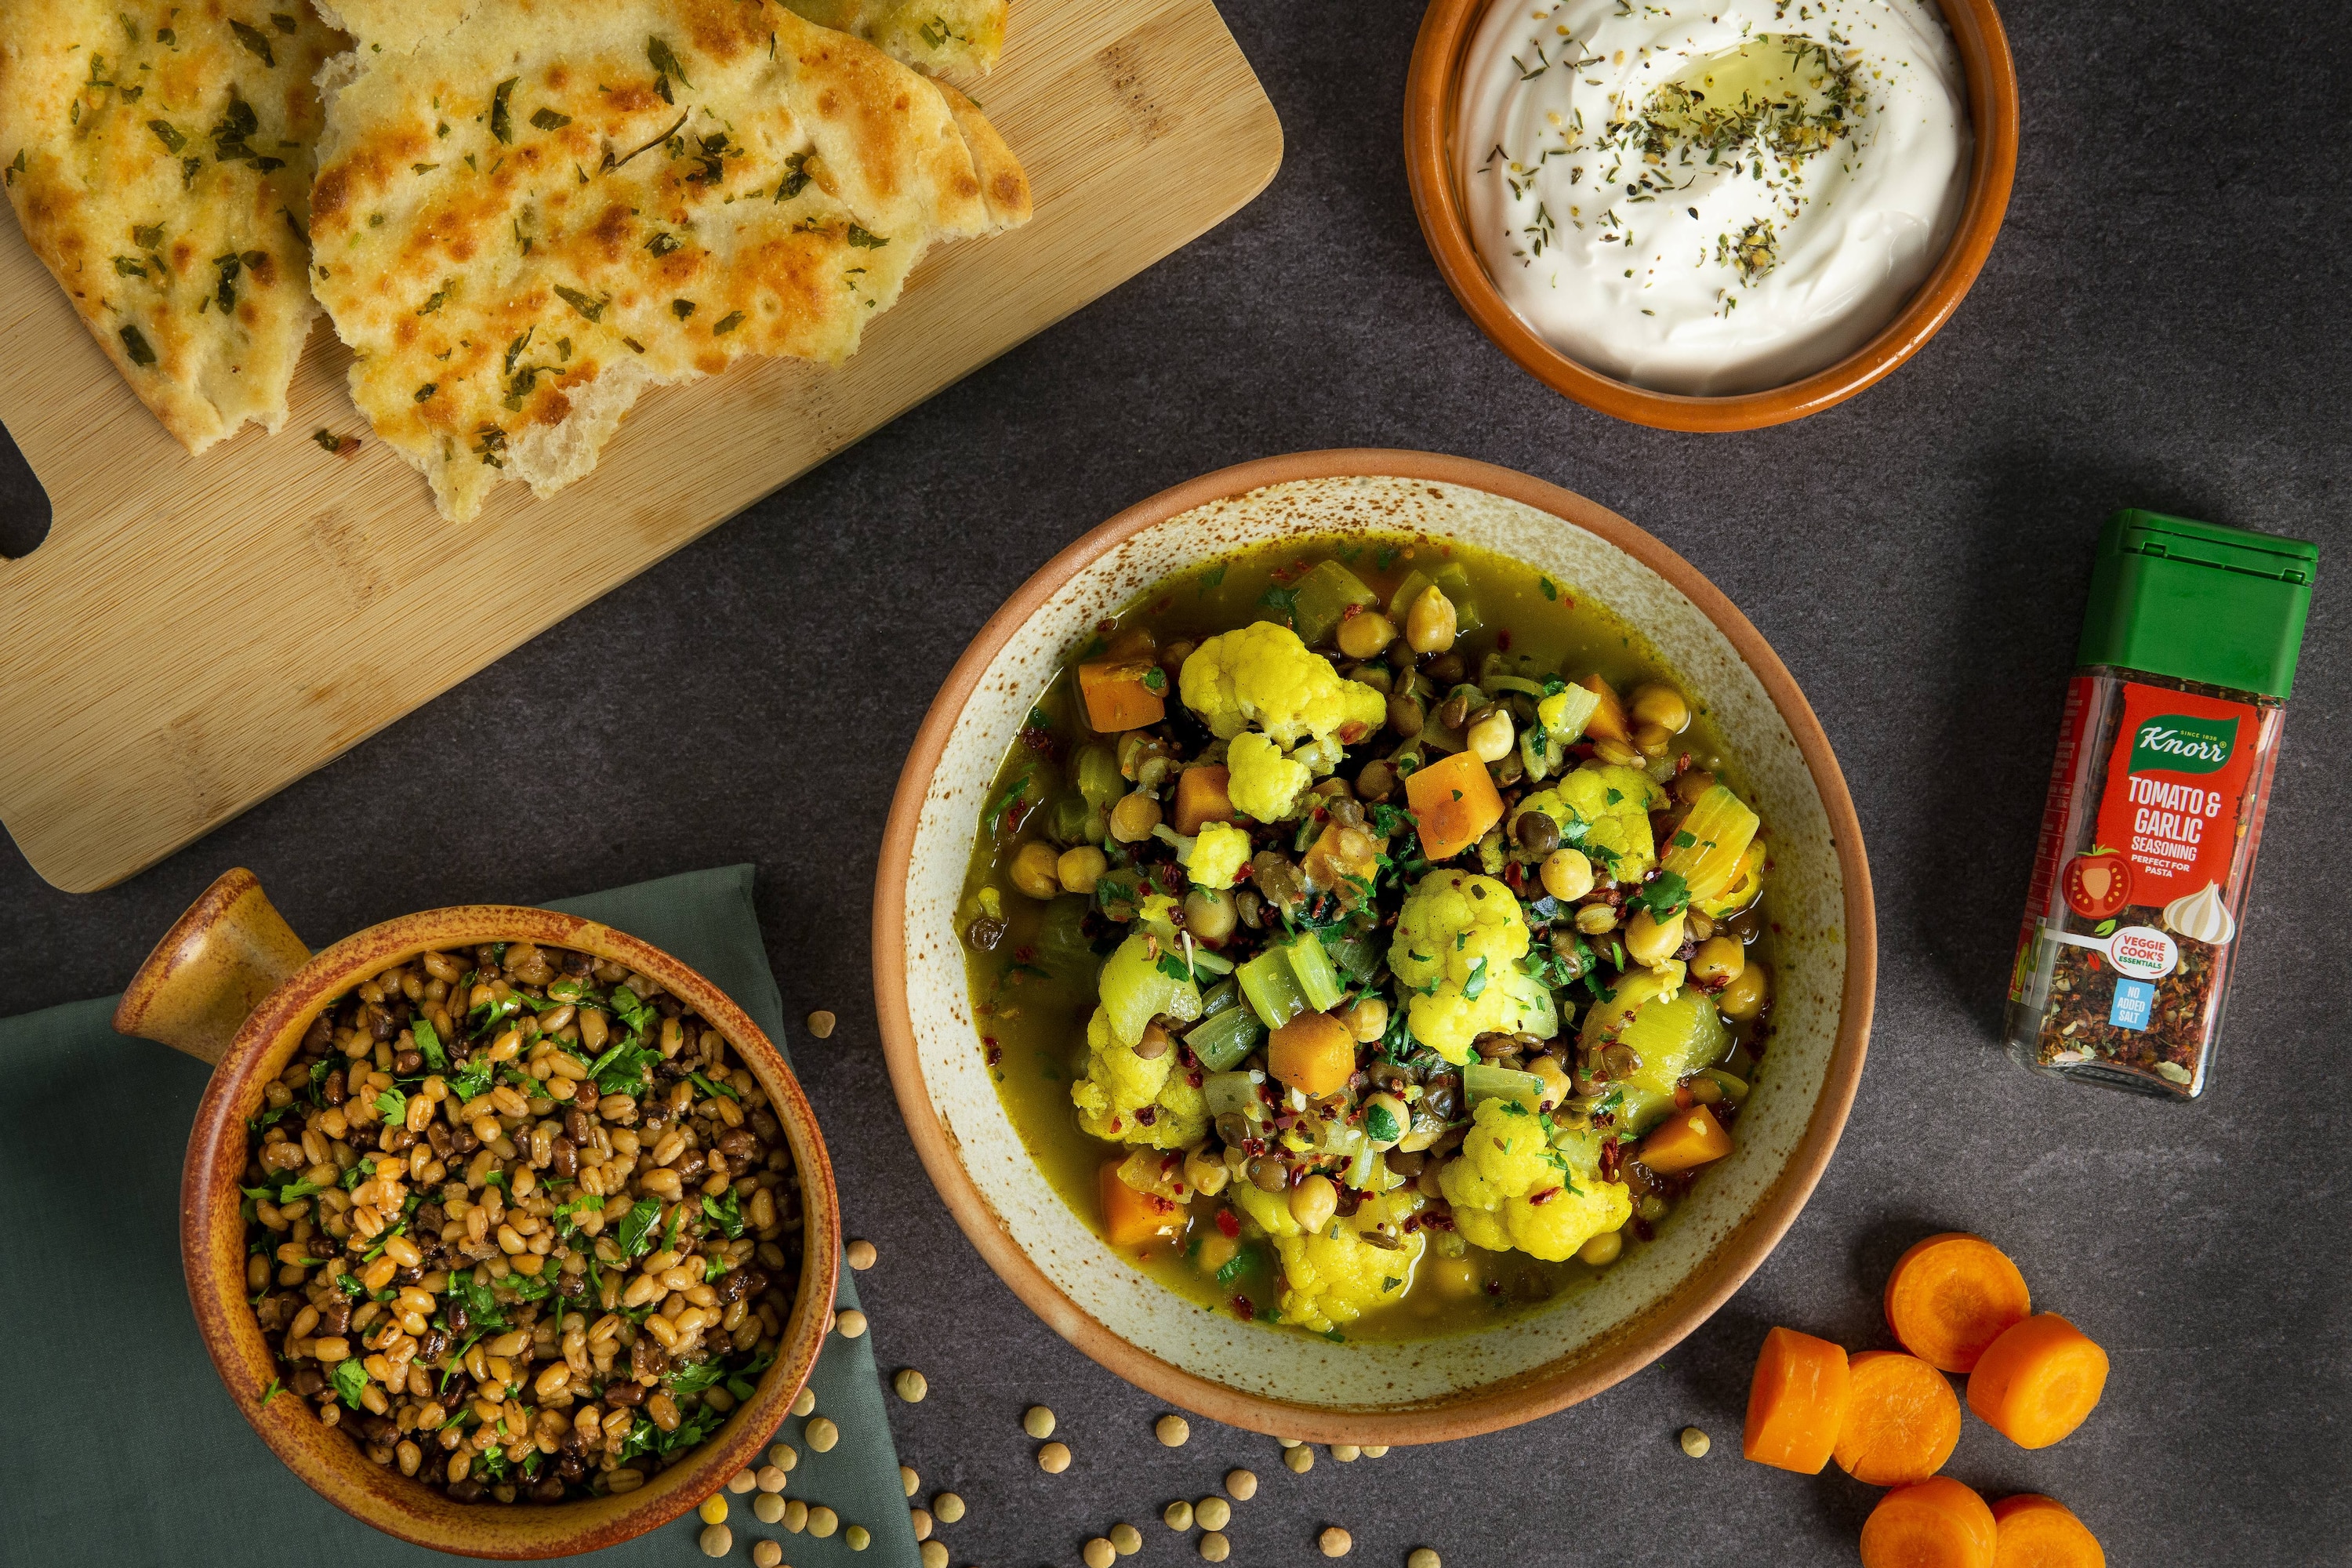 Moroccan Style Lentil and Vegetable Stew